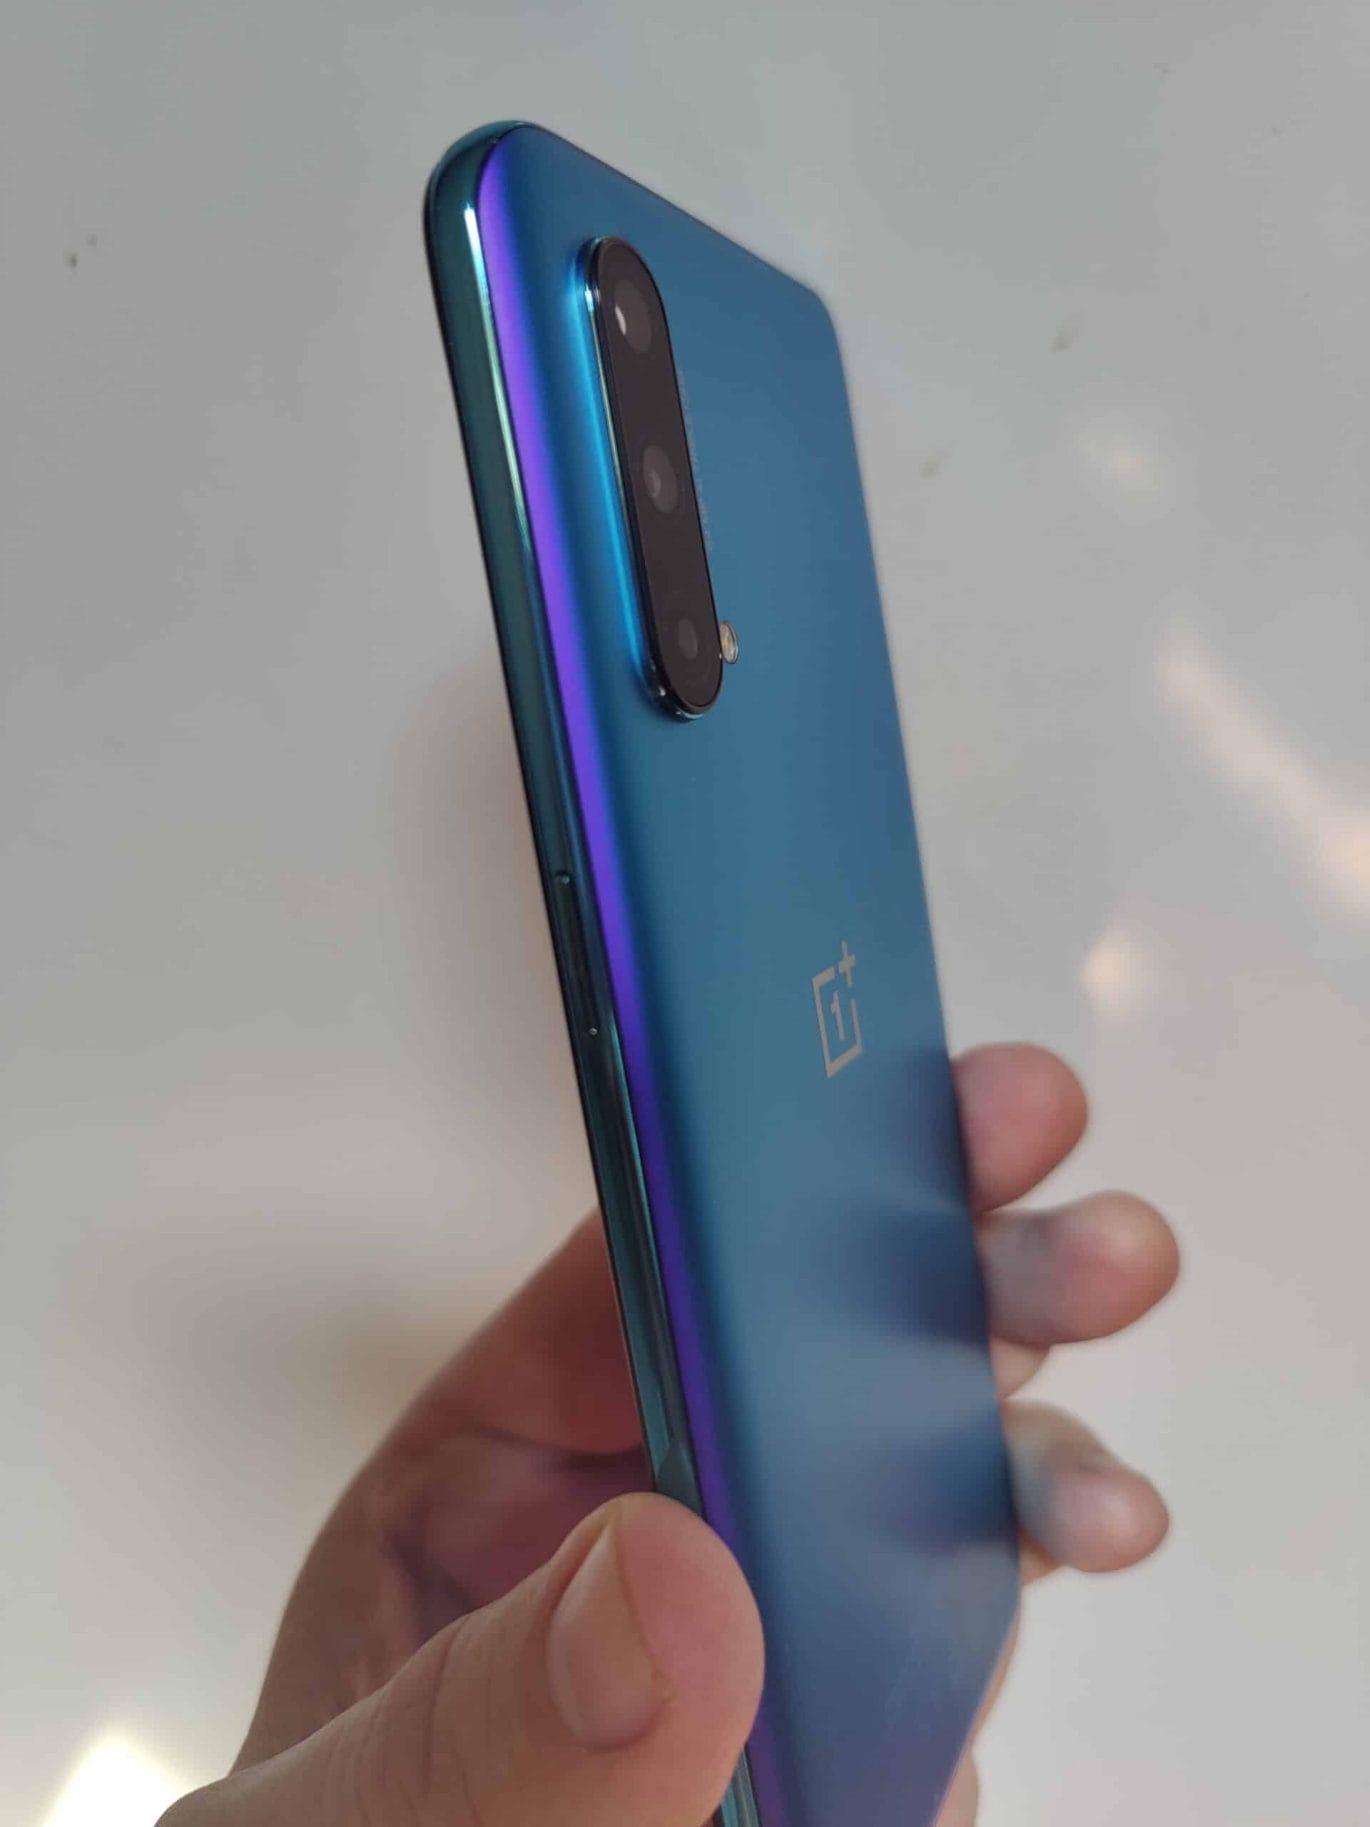  OnePlus Nord CE 5G